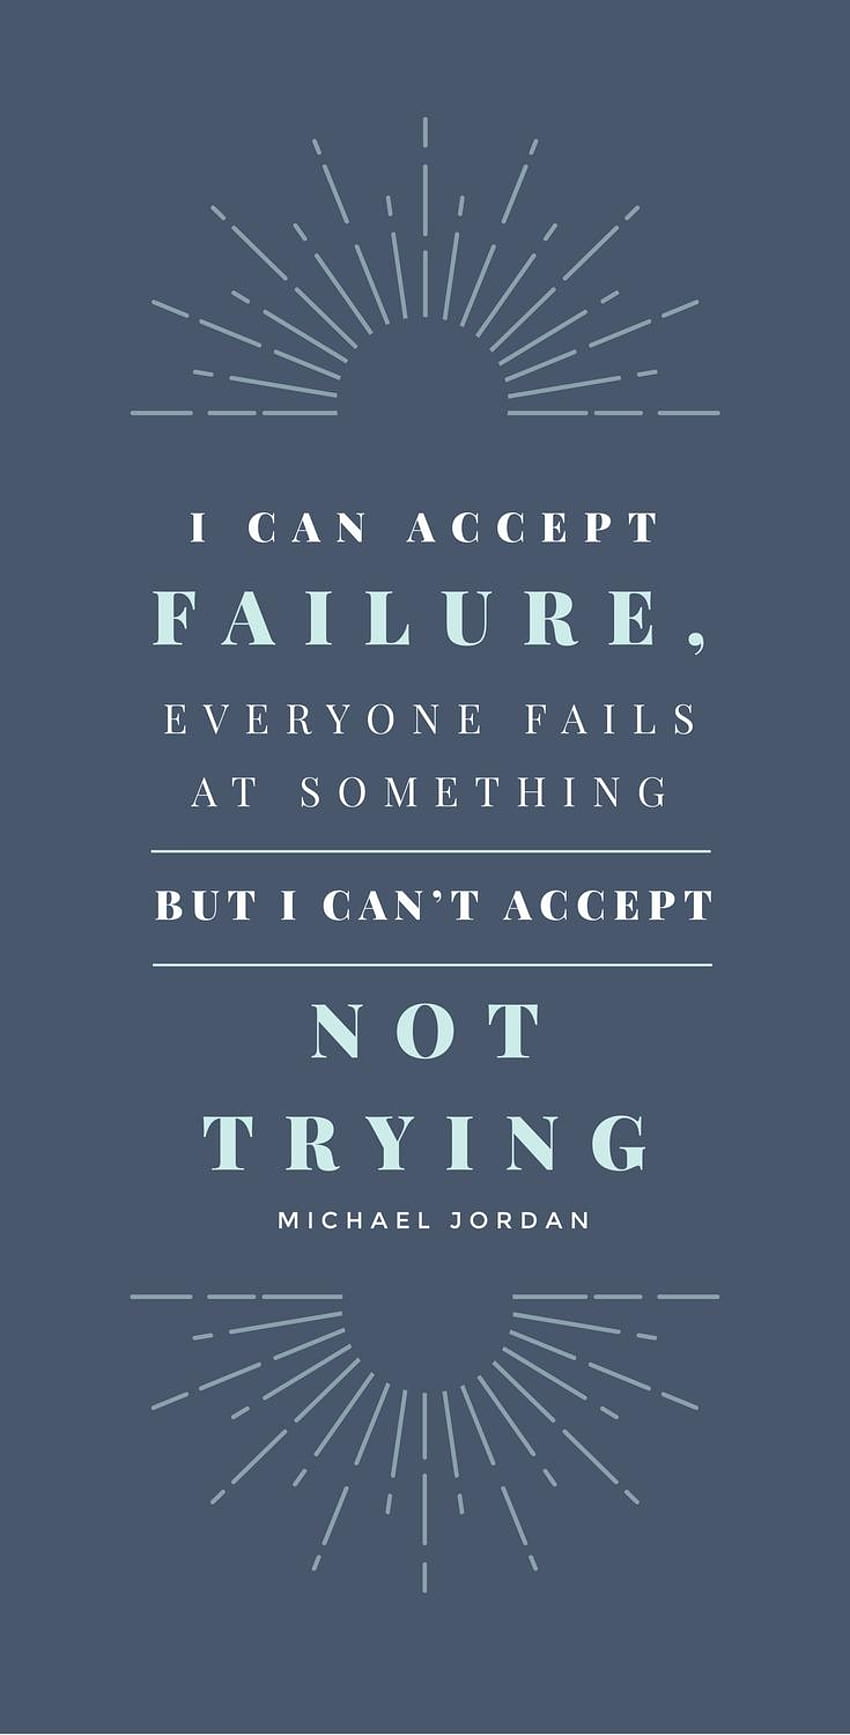 Download wallpapers Every failure is a step to success William Whewell  quotes 4k leather texture quotes about success motivation for desktop  free Pictures for desktop free